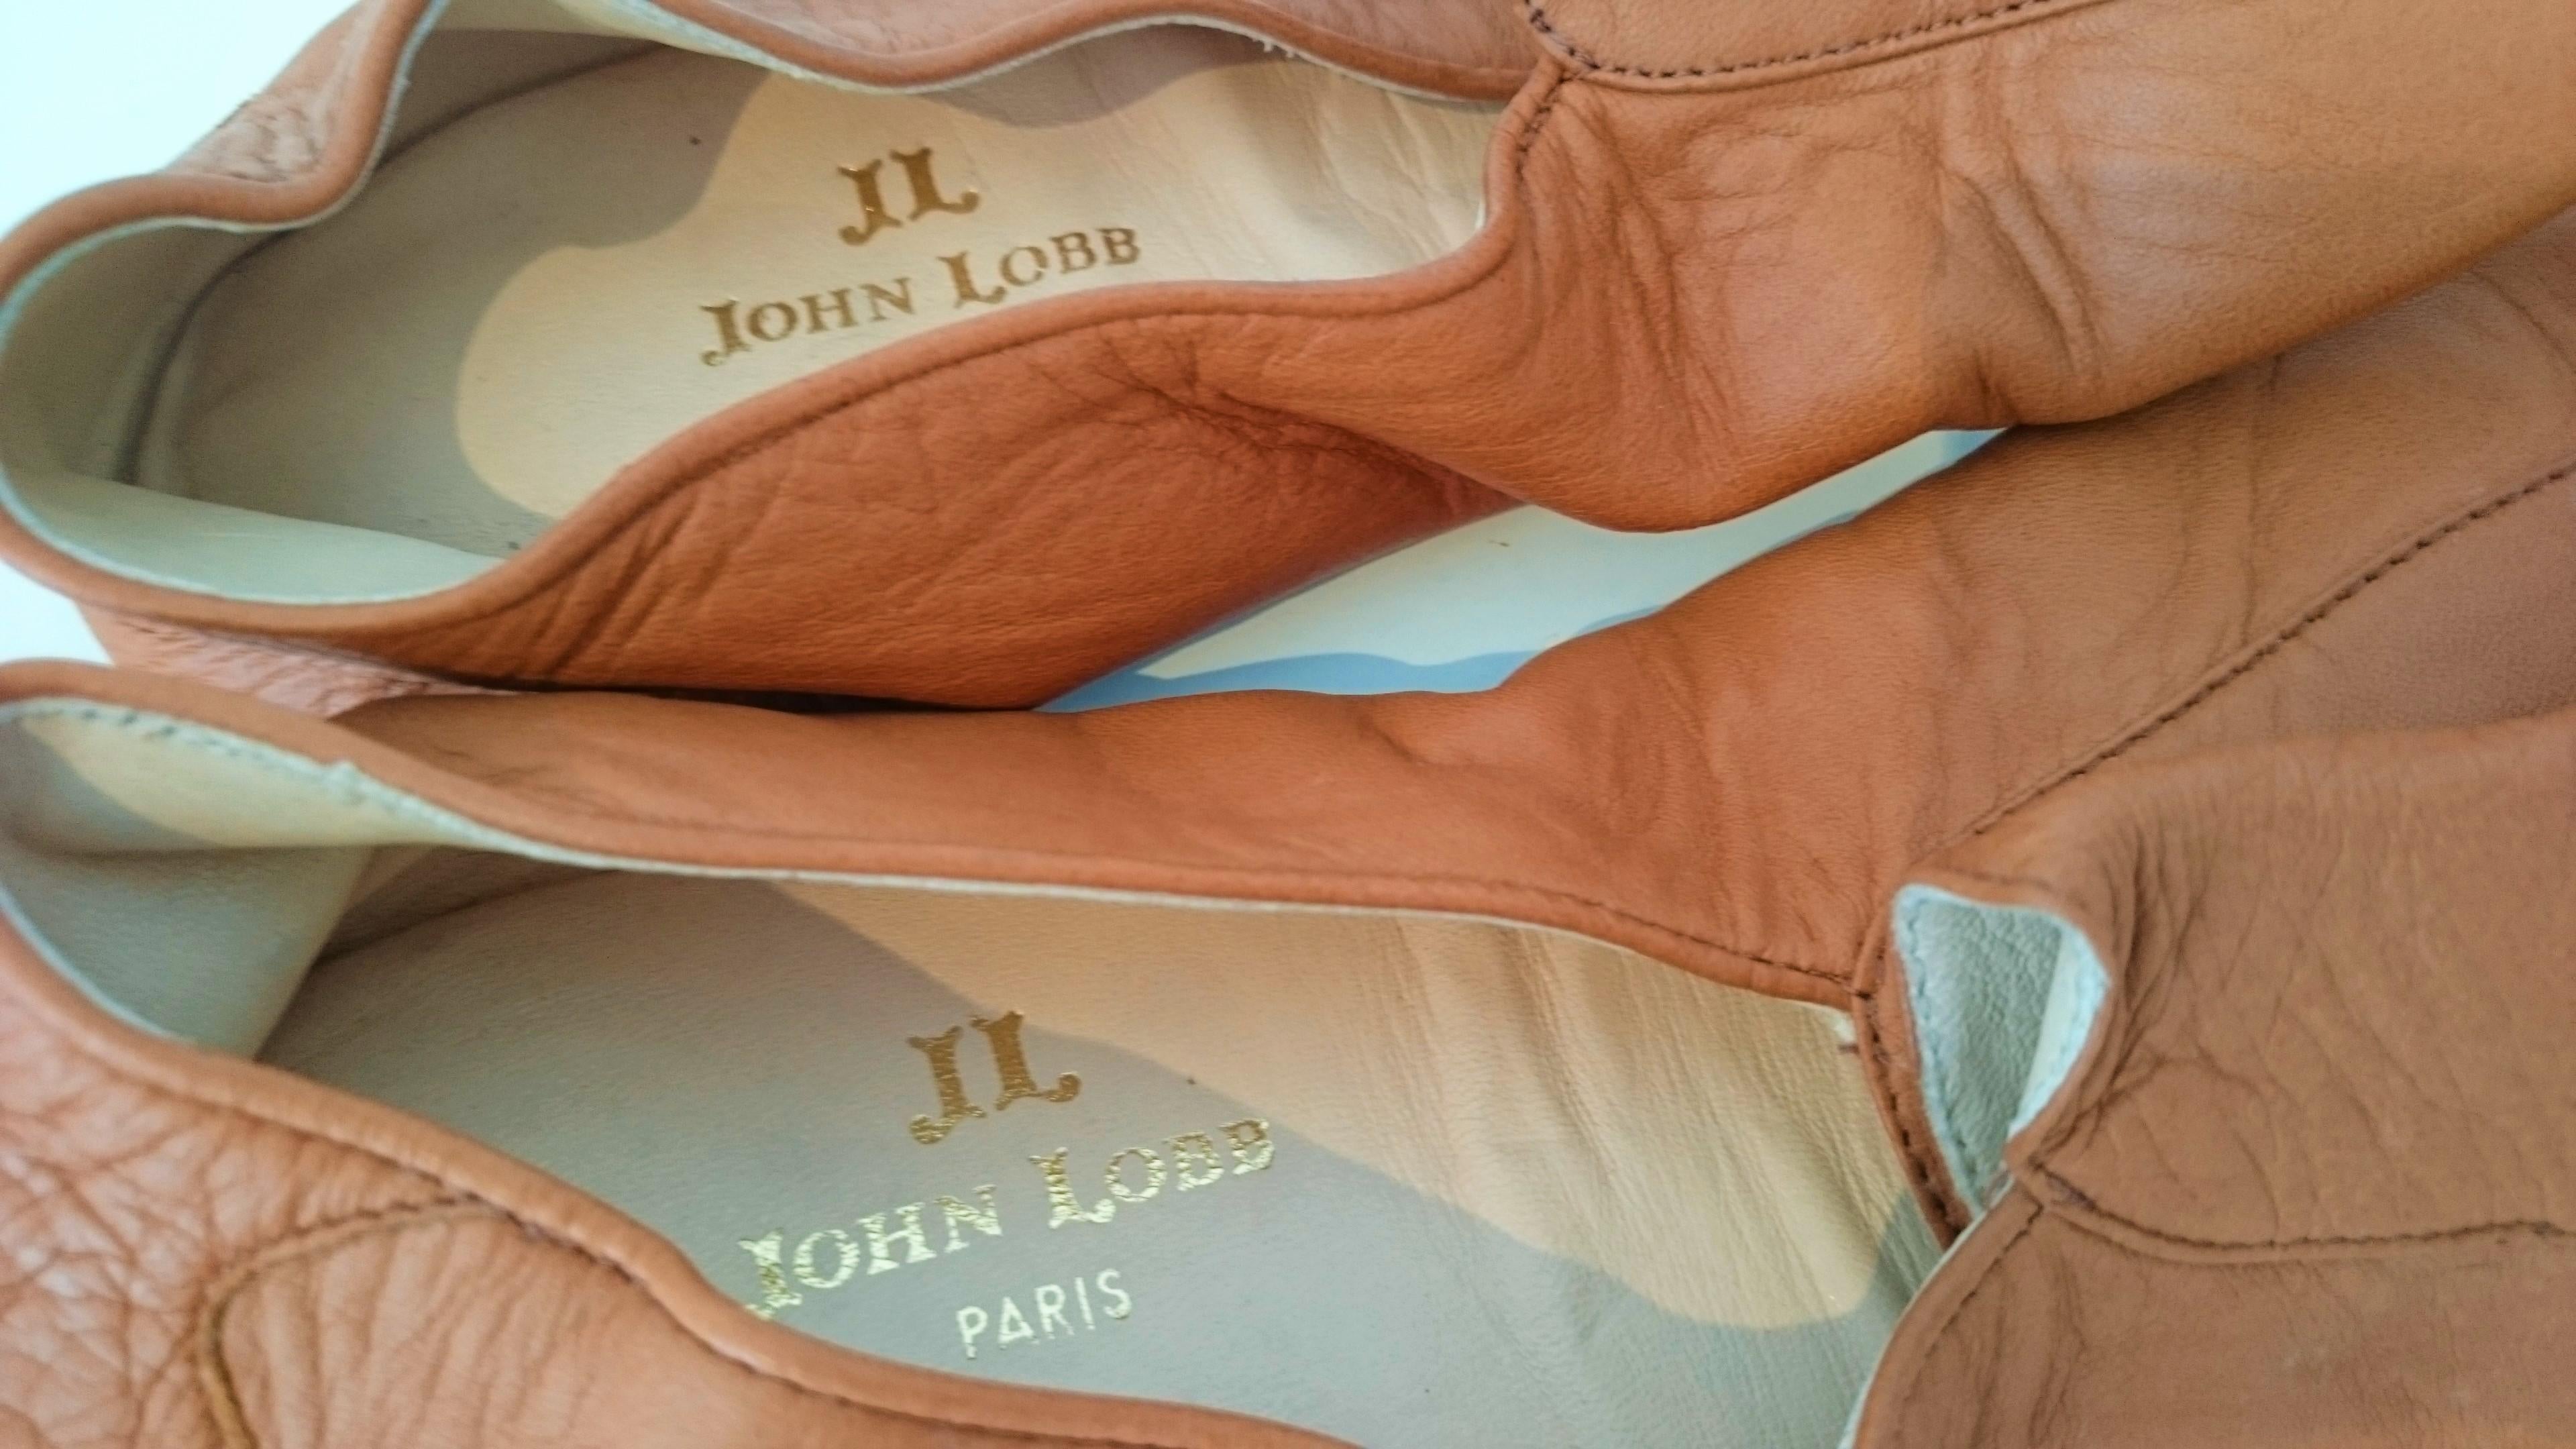 John Lobb Leather Slippers for Home. Size 41 (EU) 3